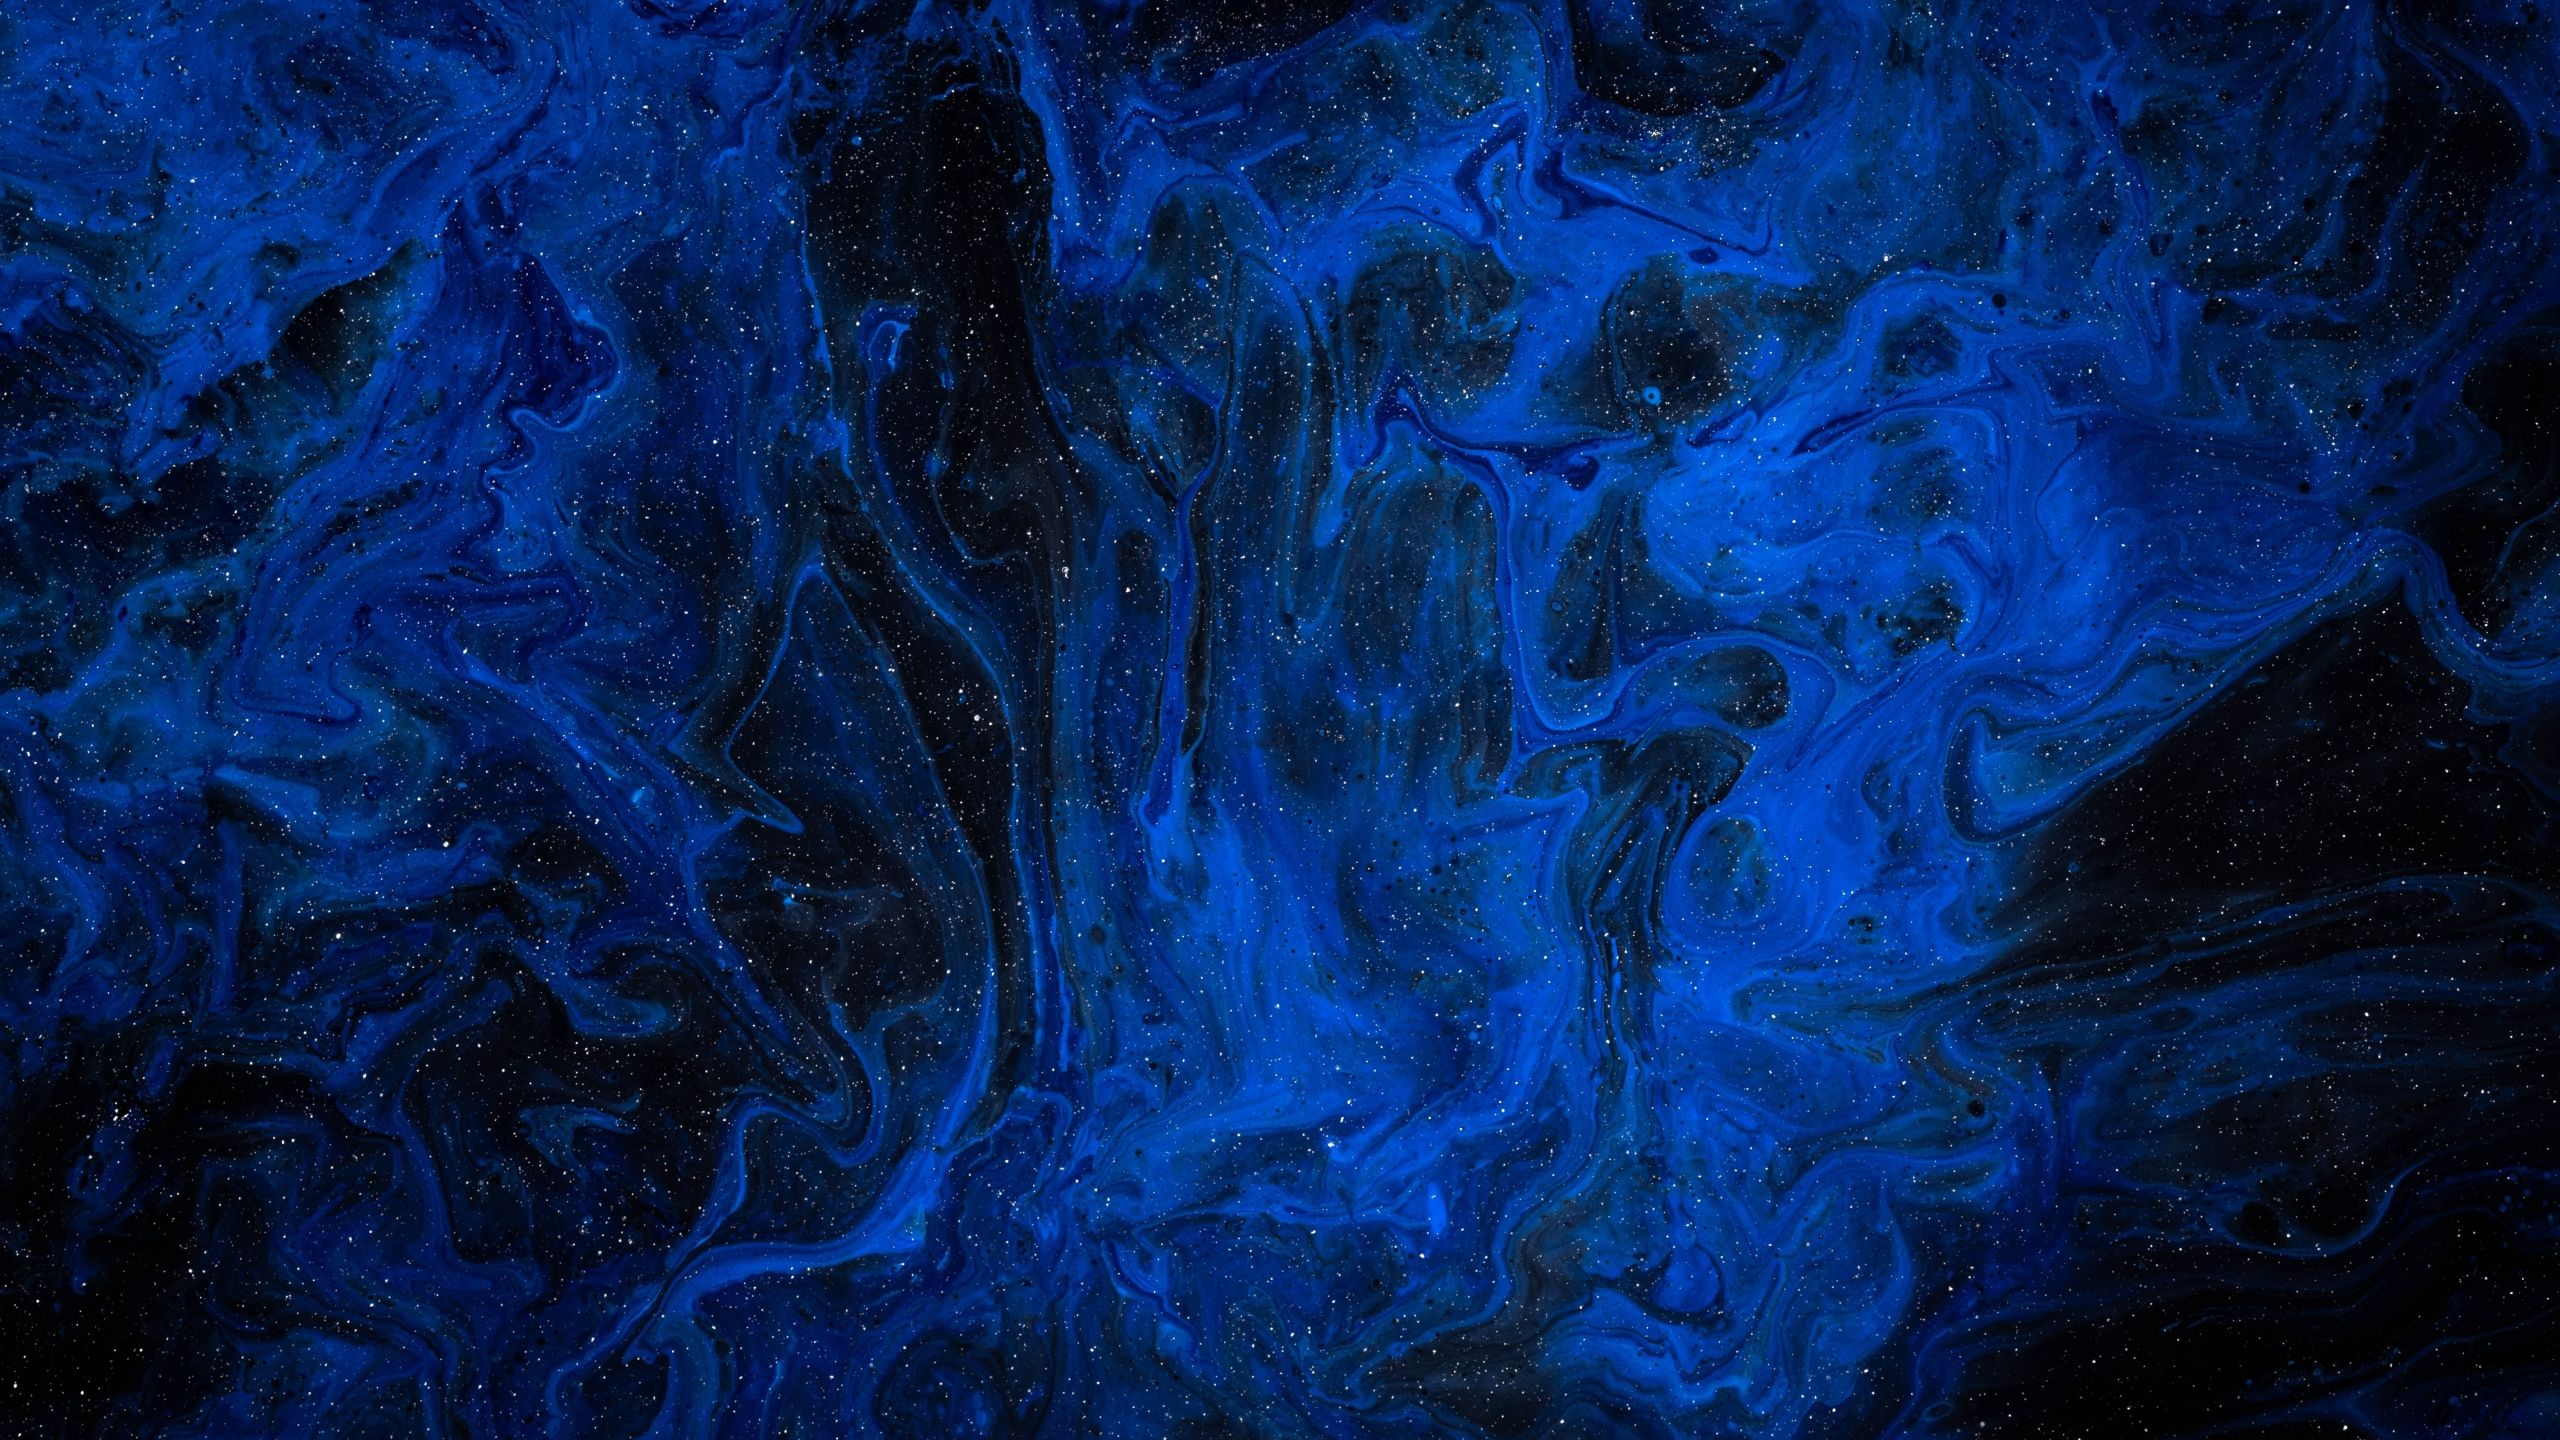 Acrylic Space 1440P Resolution Wallpaper, HD Abstract 4K